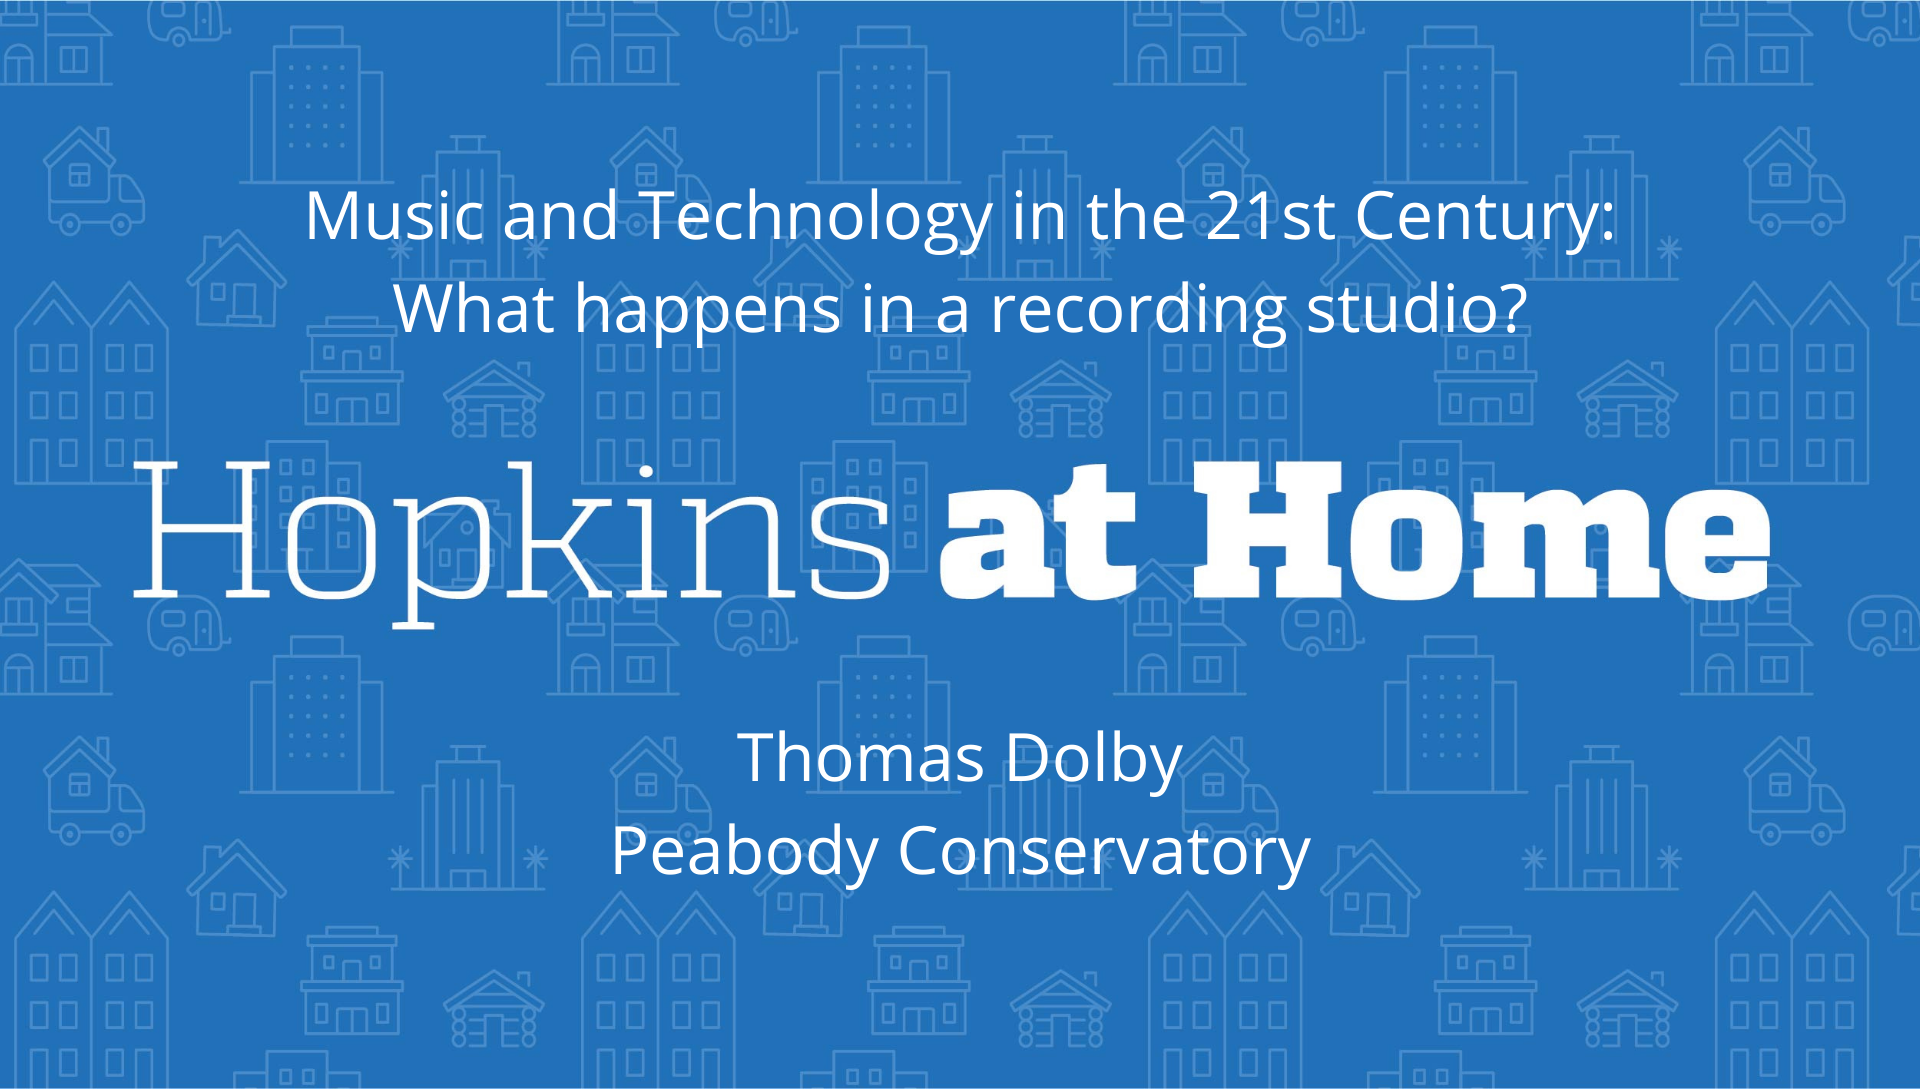 Music and Technology in the 21st Century: What happens in a recording studio?